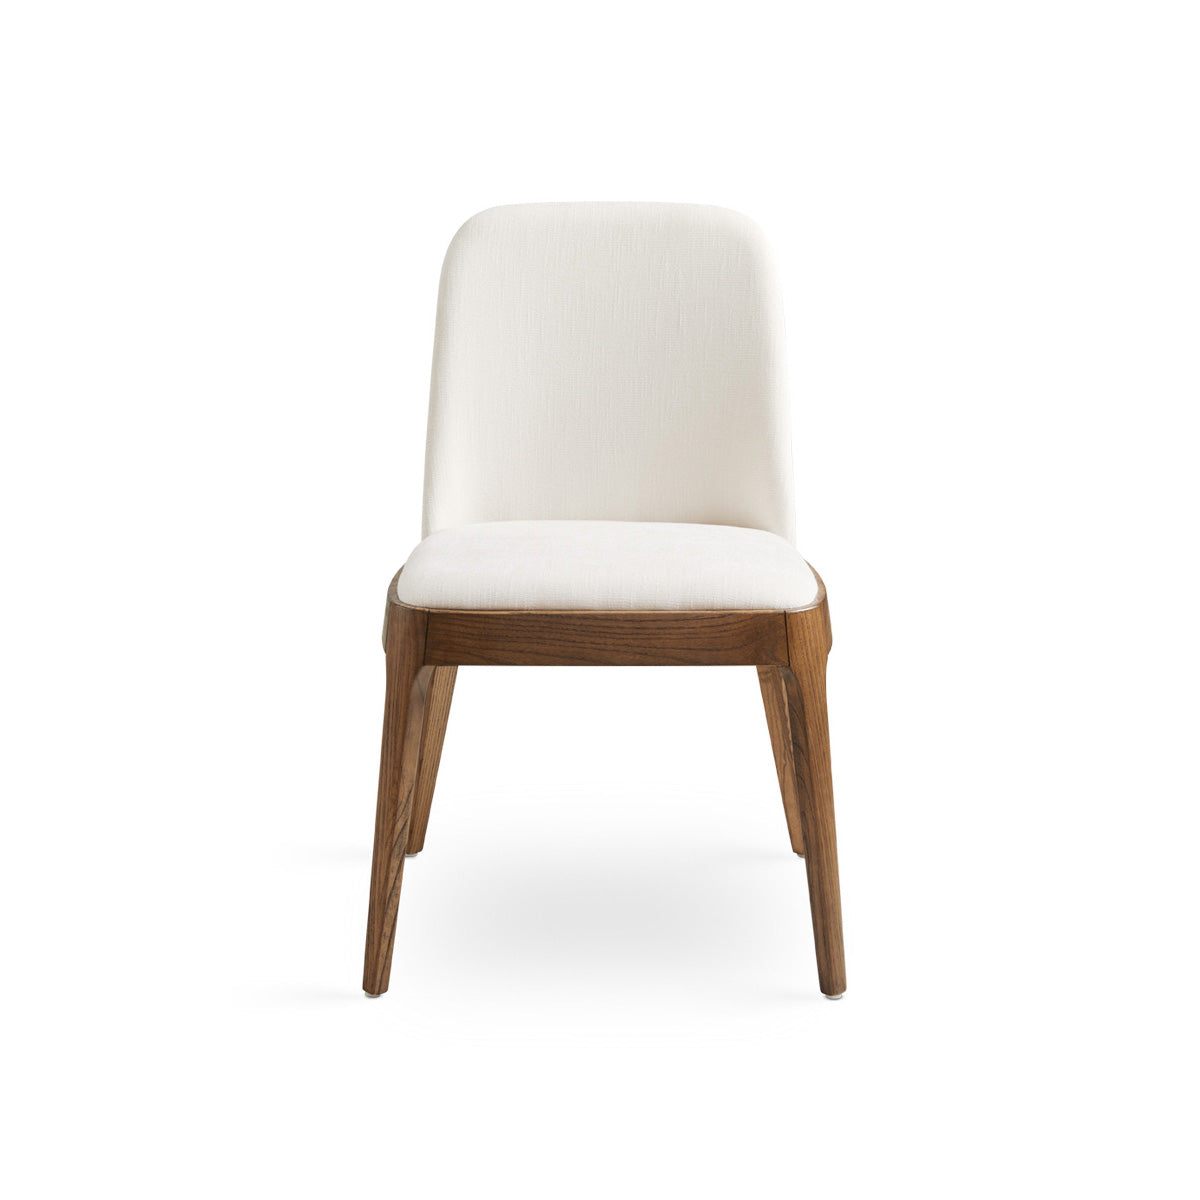 Marlon Dining Chair in Ivory